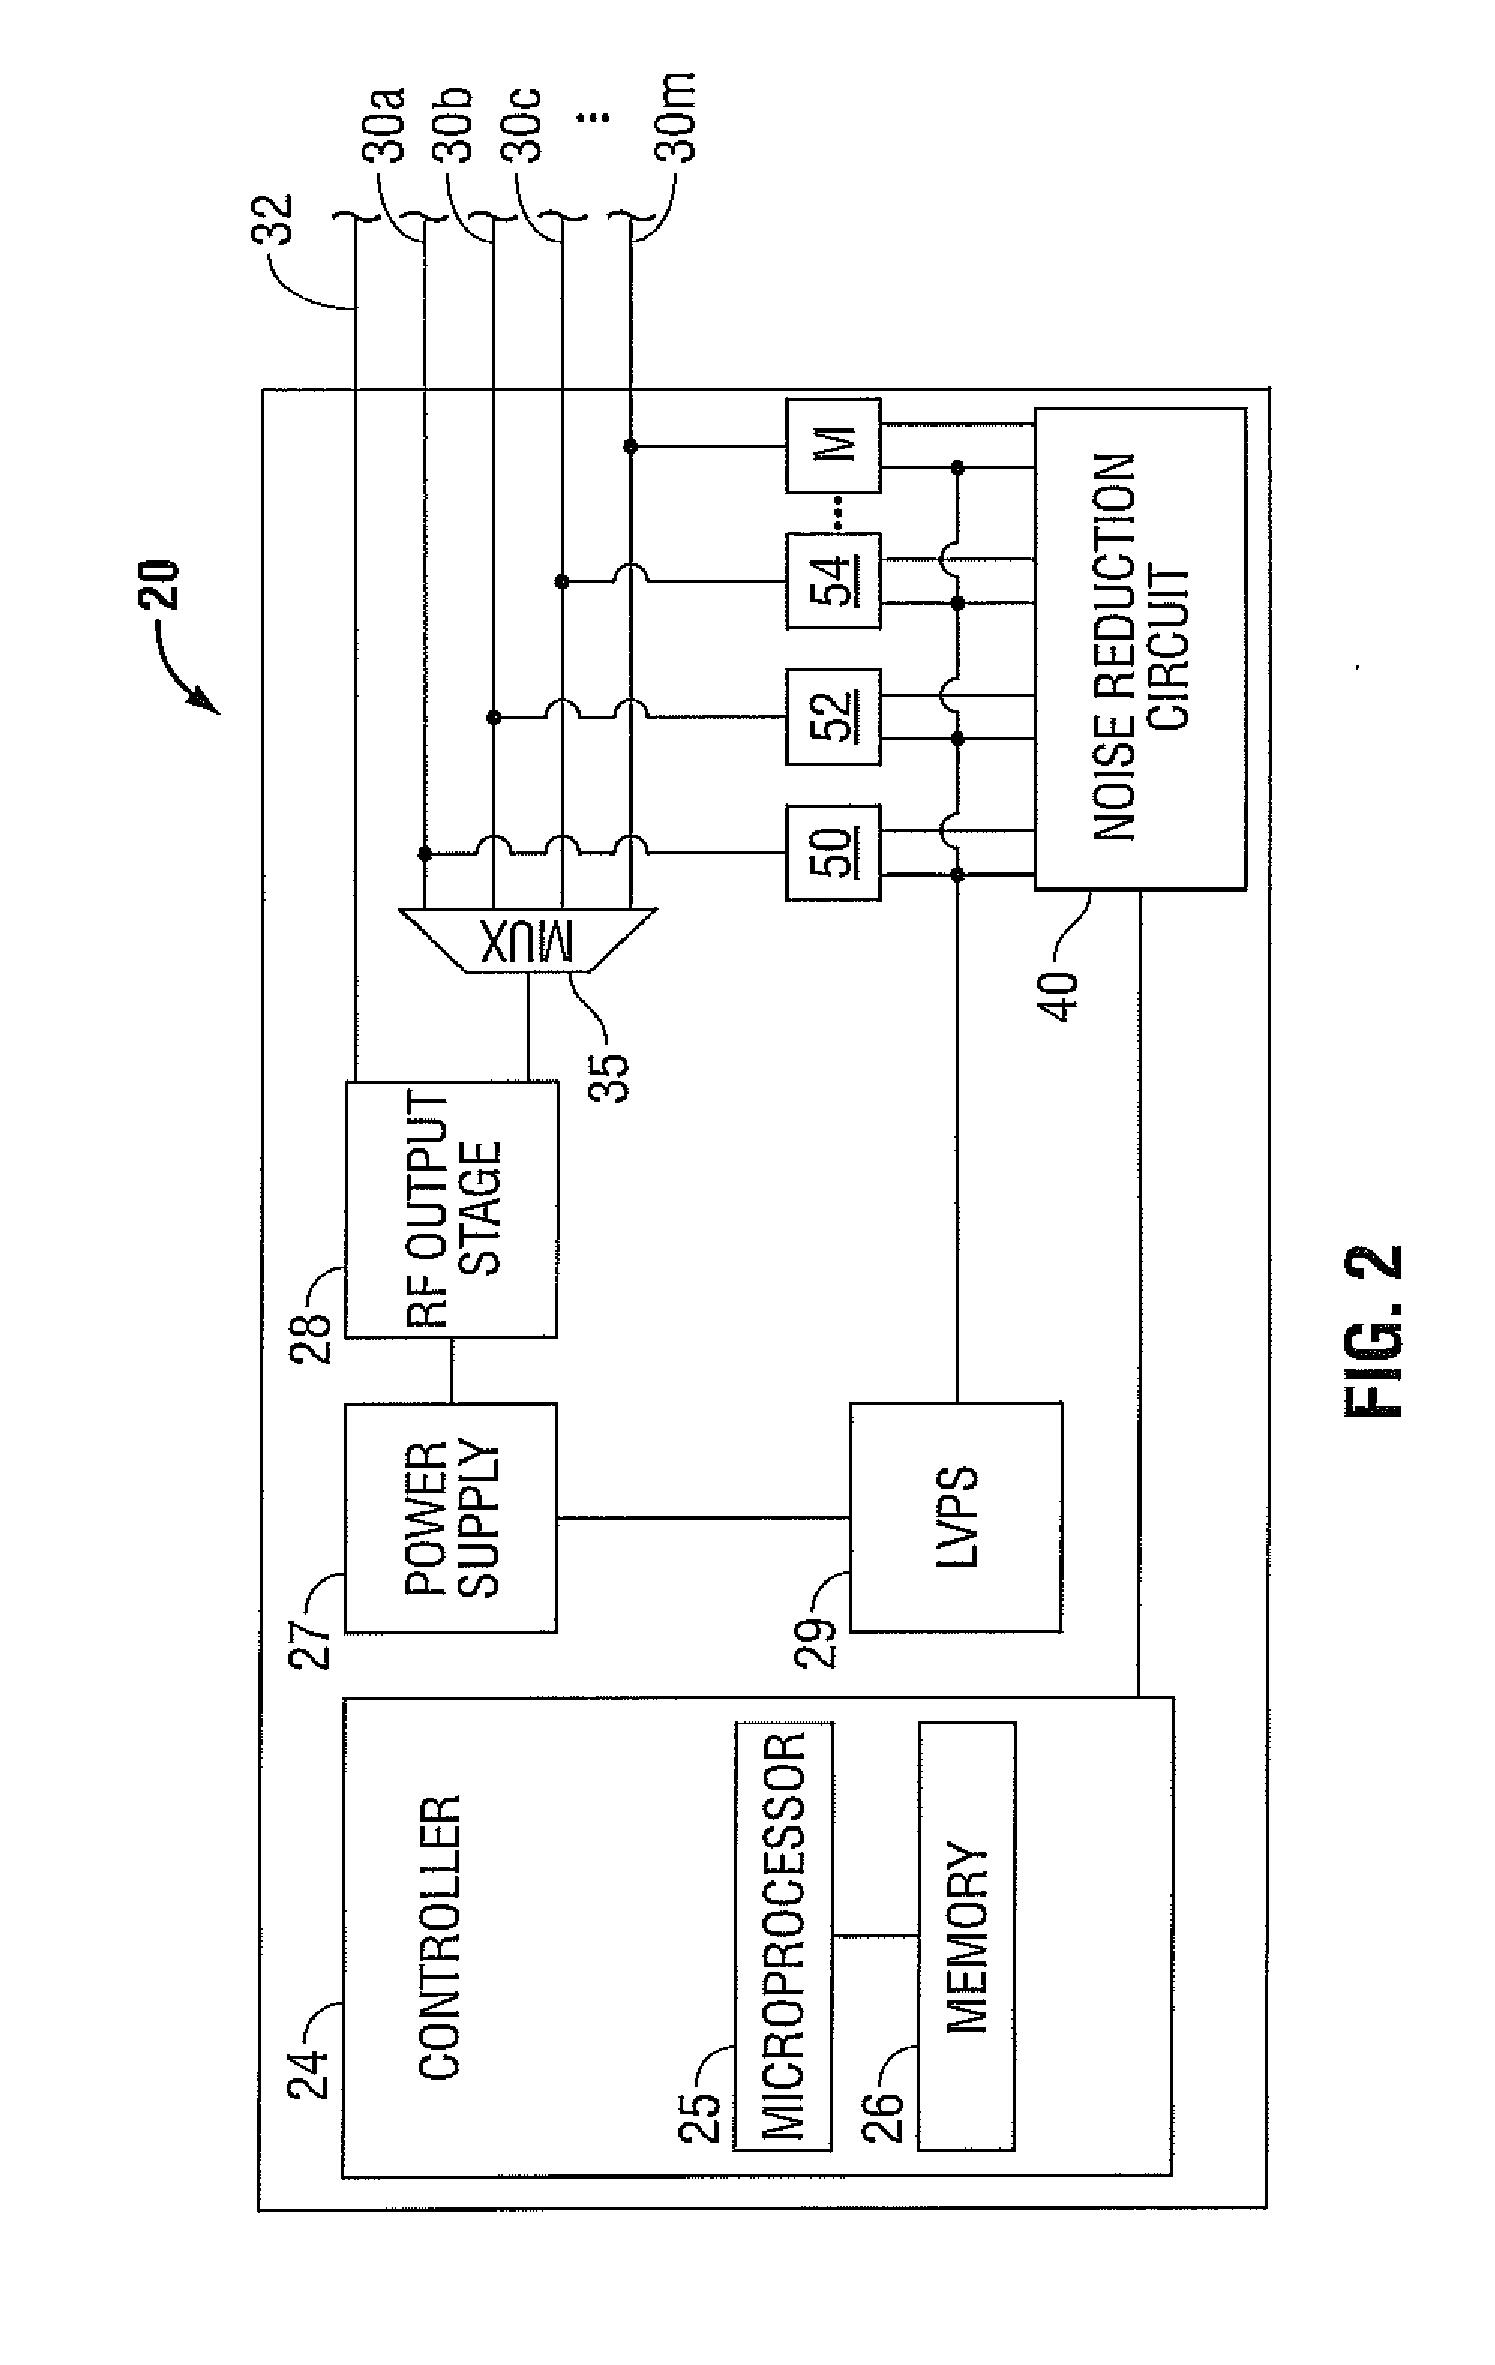 System and Method for Power Supply Noise Reduction